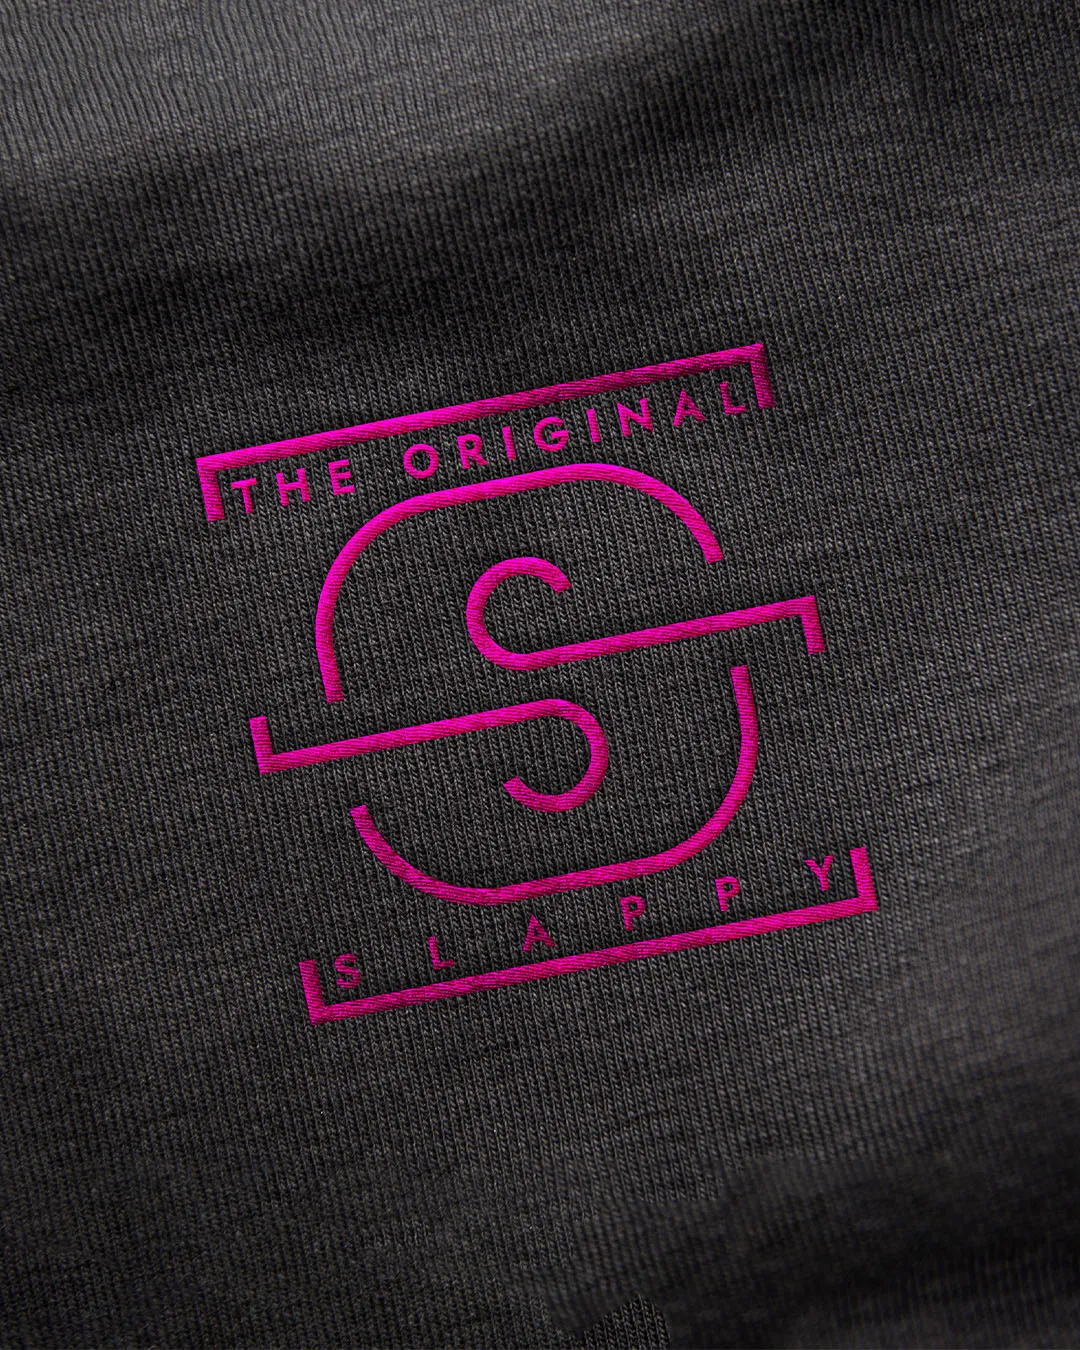 The SLAPPY logo mocked up as an embroidered logo on fabric